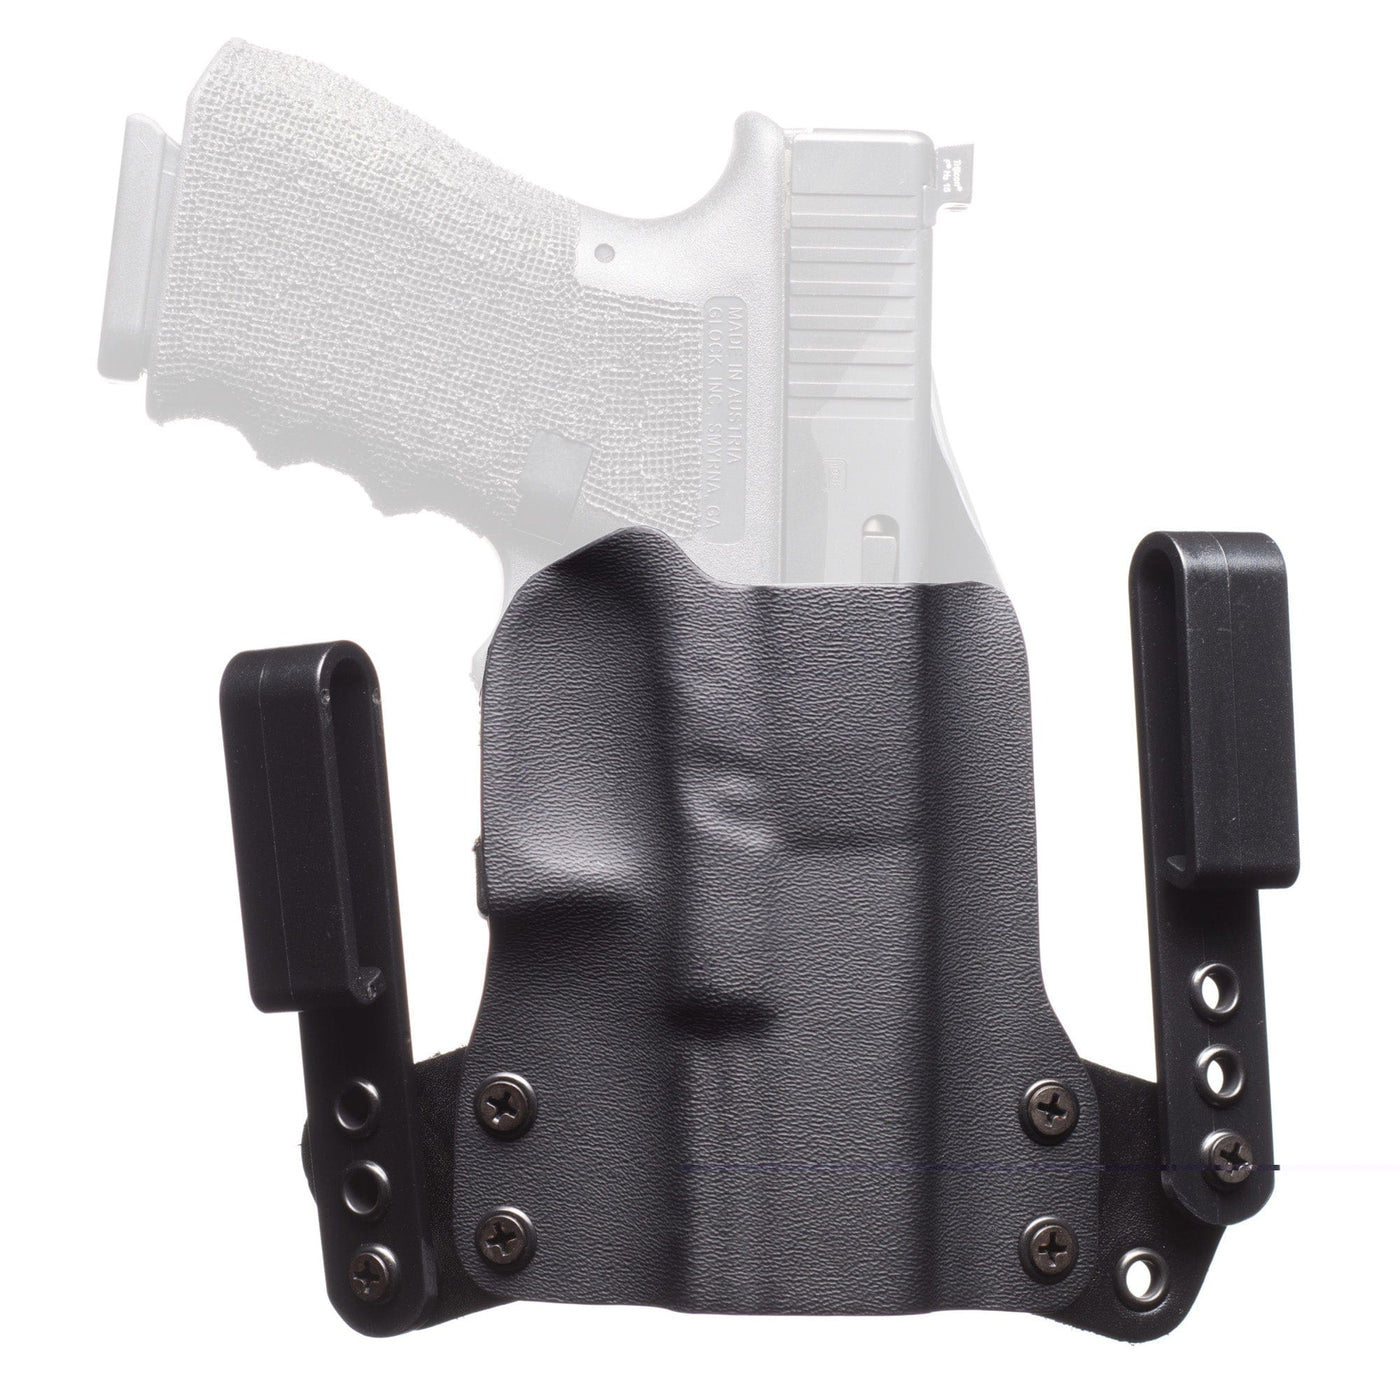 BlackPoint Tactical Blk Pnt Mini Wing Taurus 856 Rh Blk Holsters